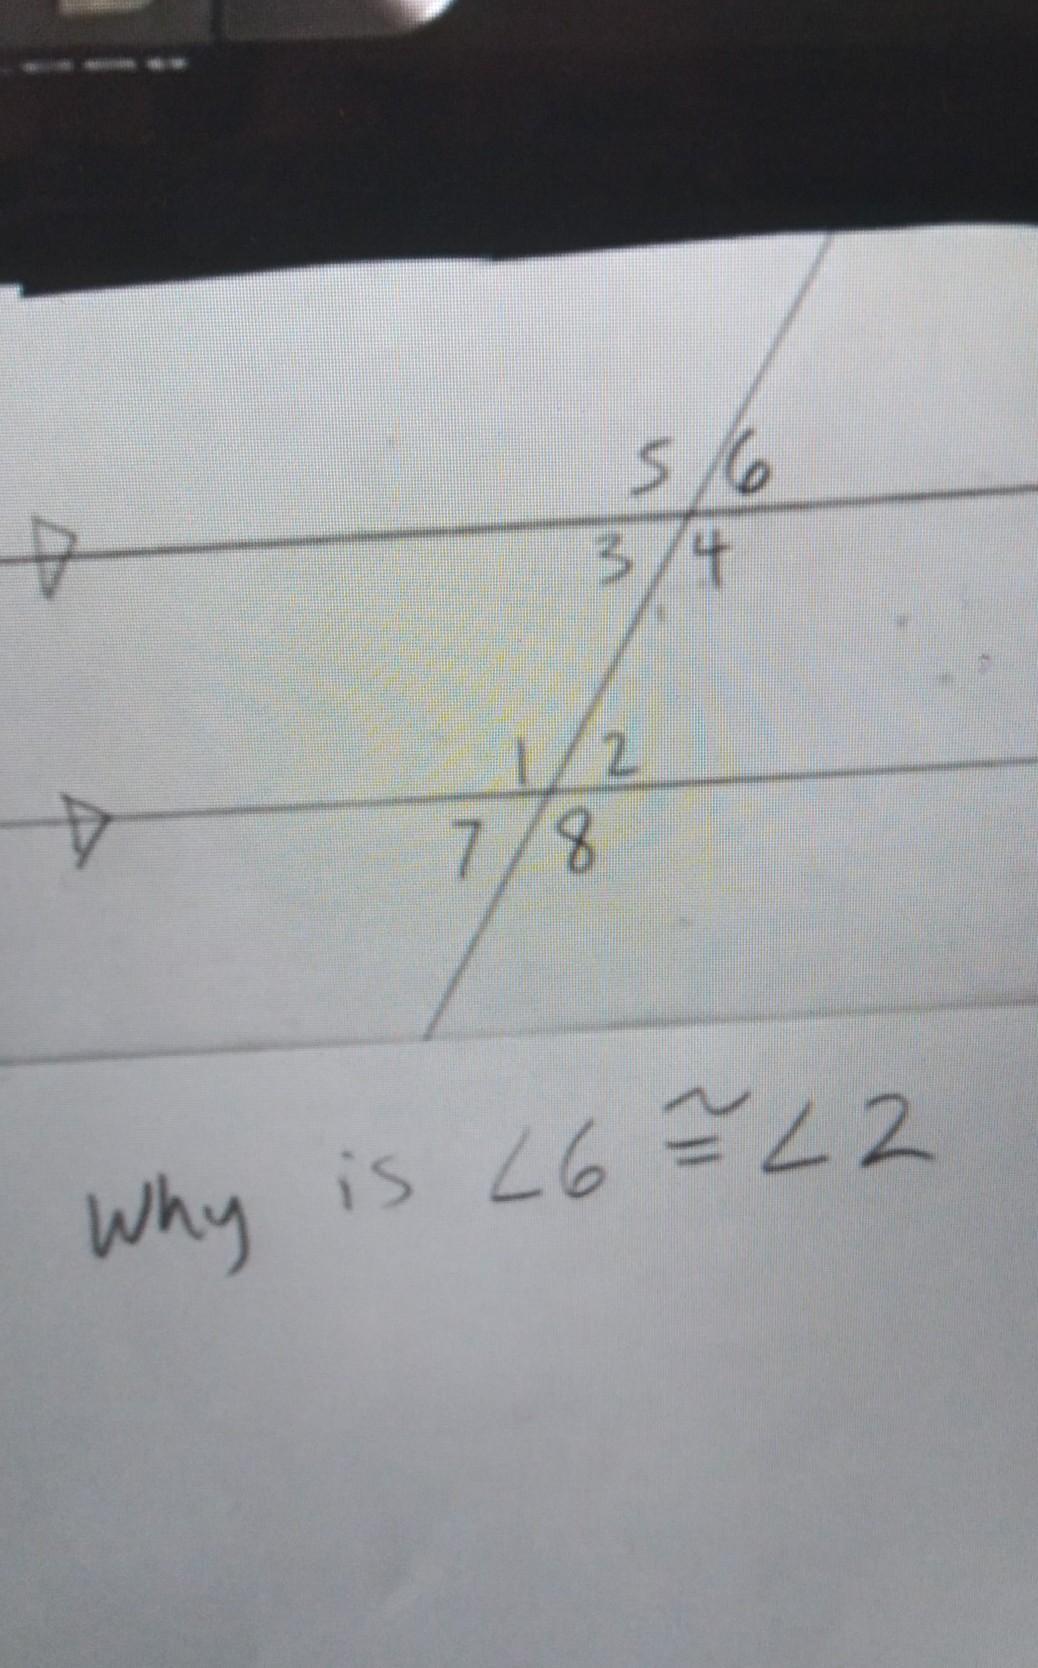 Why Is Angel 6 Congruent To Angel 2